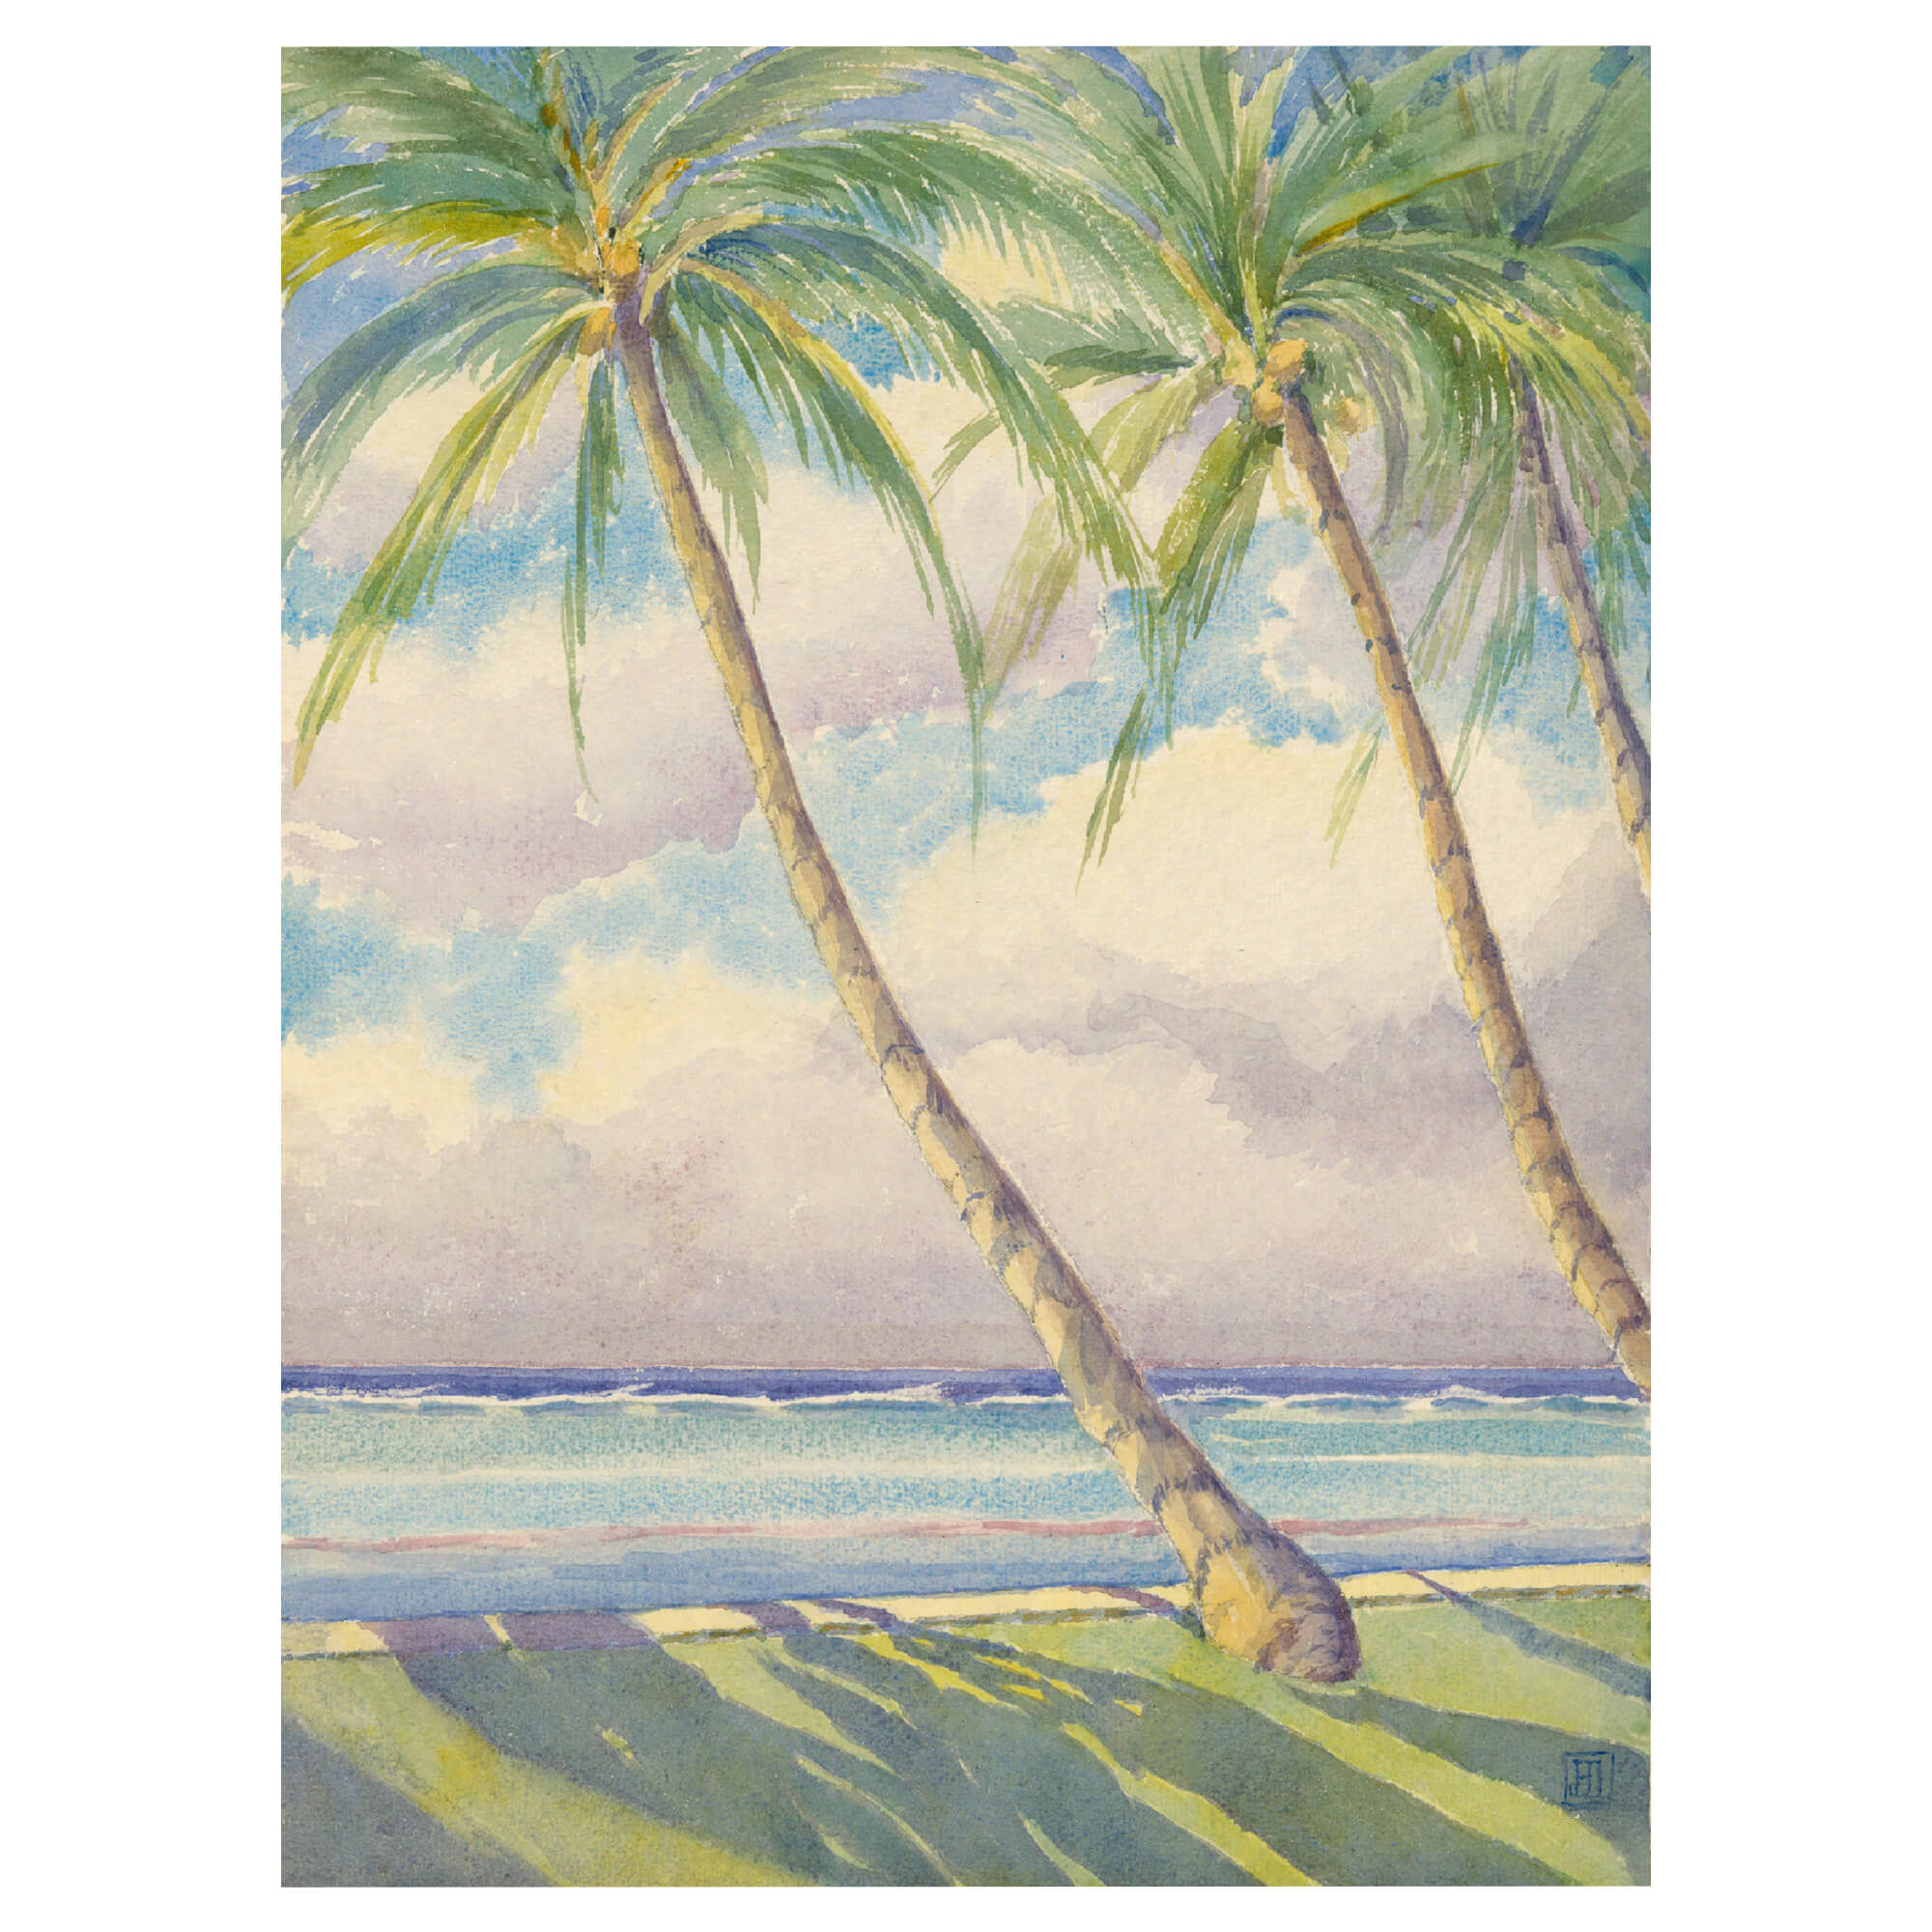 A pastel-hued tropical scene